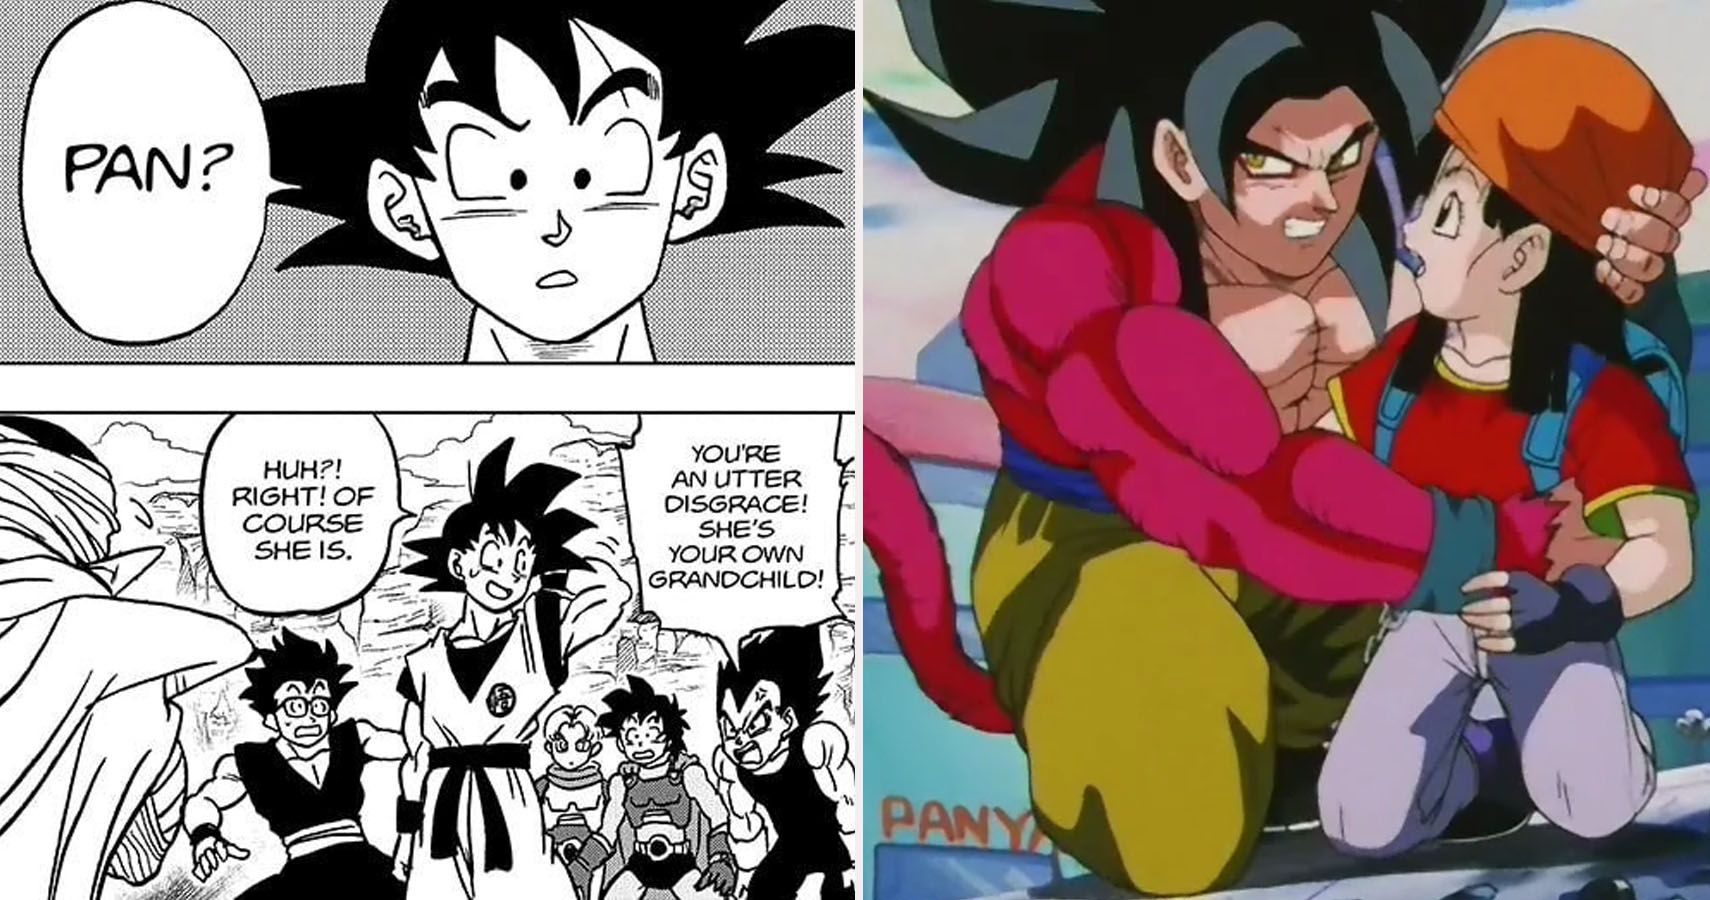 Goku forgetting Pan in Dragon Ball Super and SSJ4 Goku holding Pan in DBGT